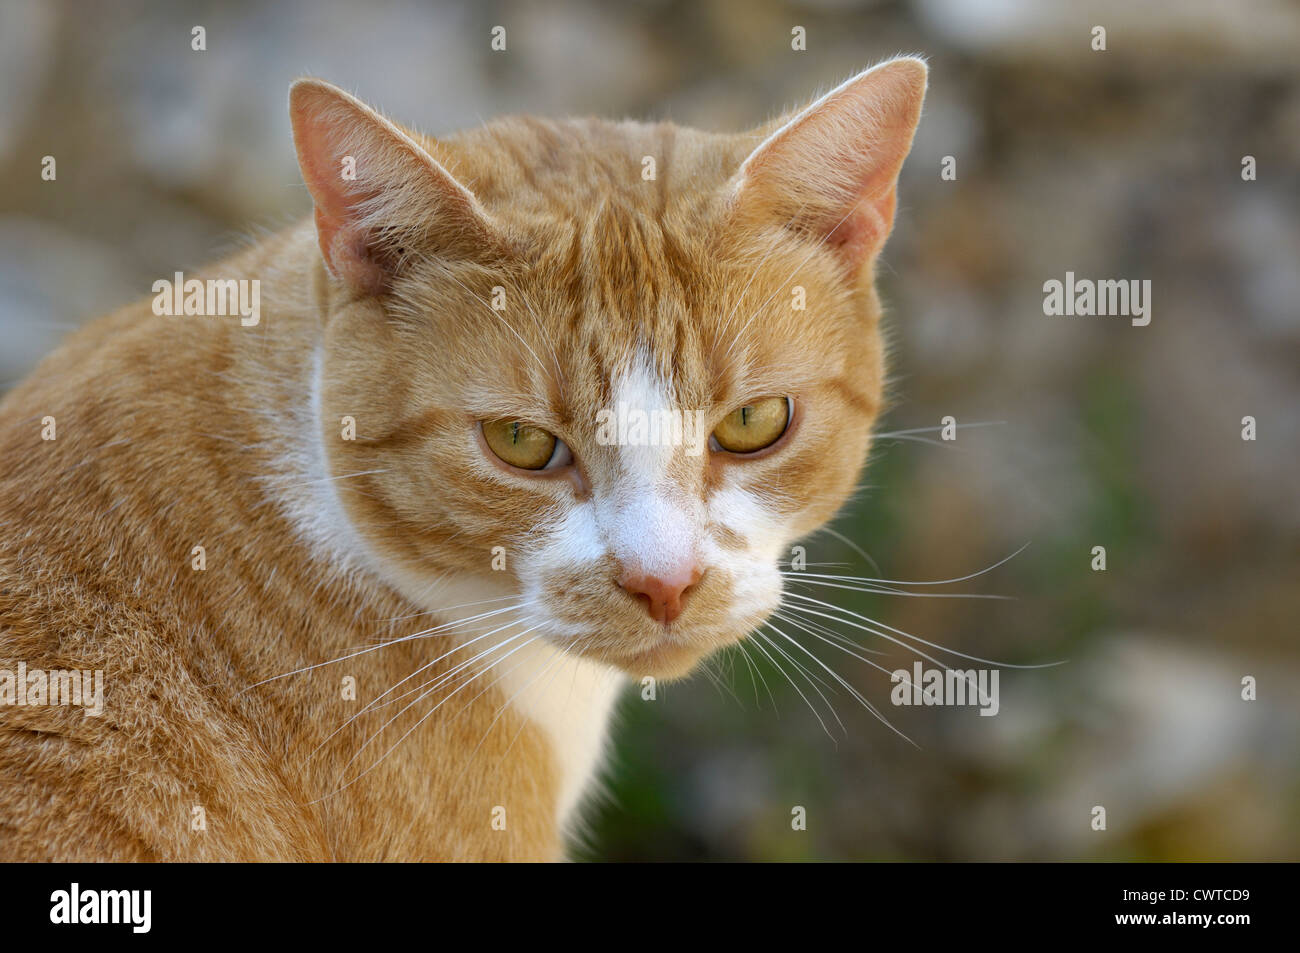 A ginger cat watching with ears alert Stock Photo